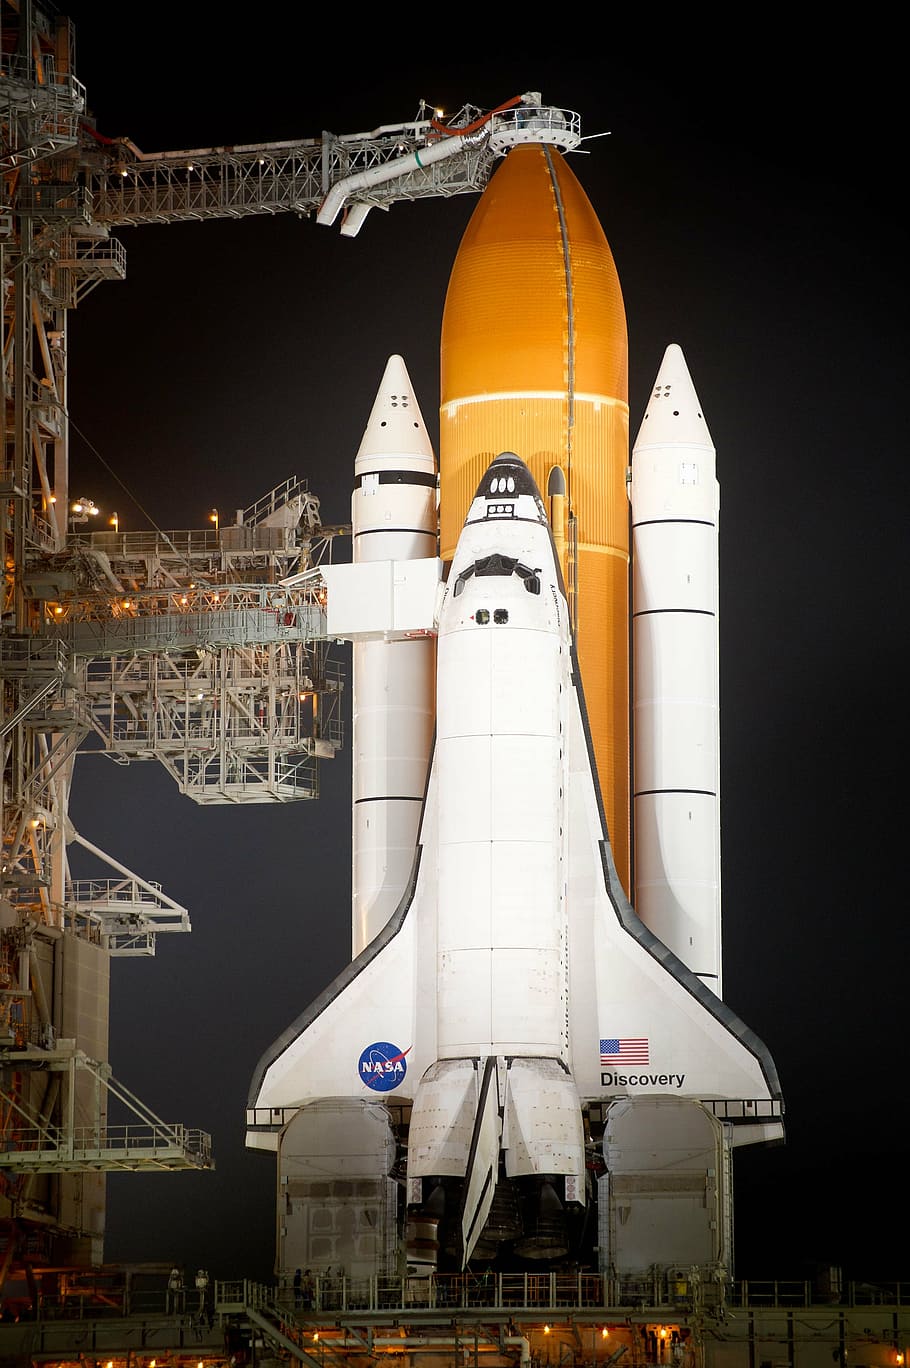 White And Orange Nasa Discovery Space Shuttle During - Space Shuttle Program - HD Wallpaper 